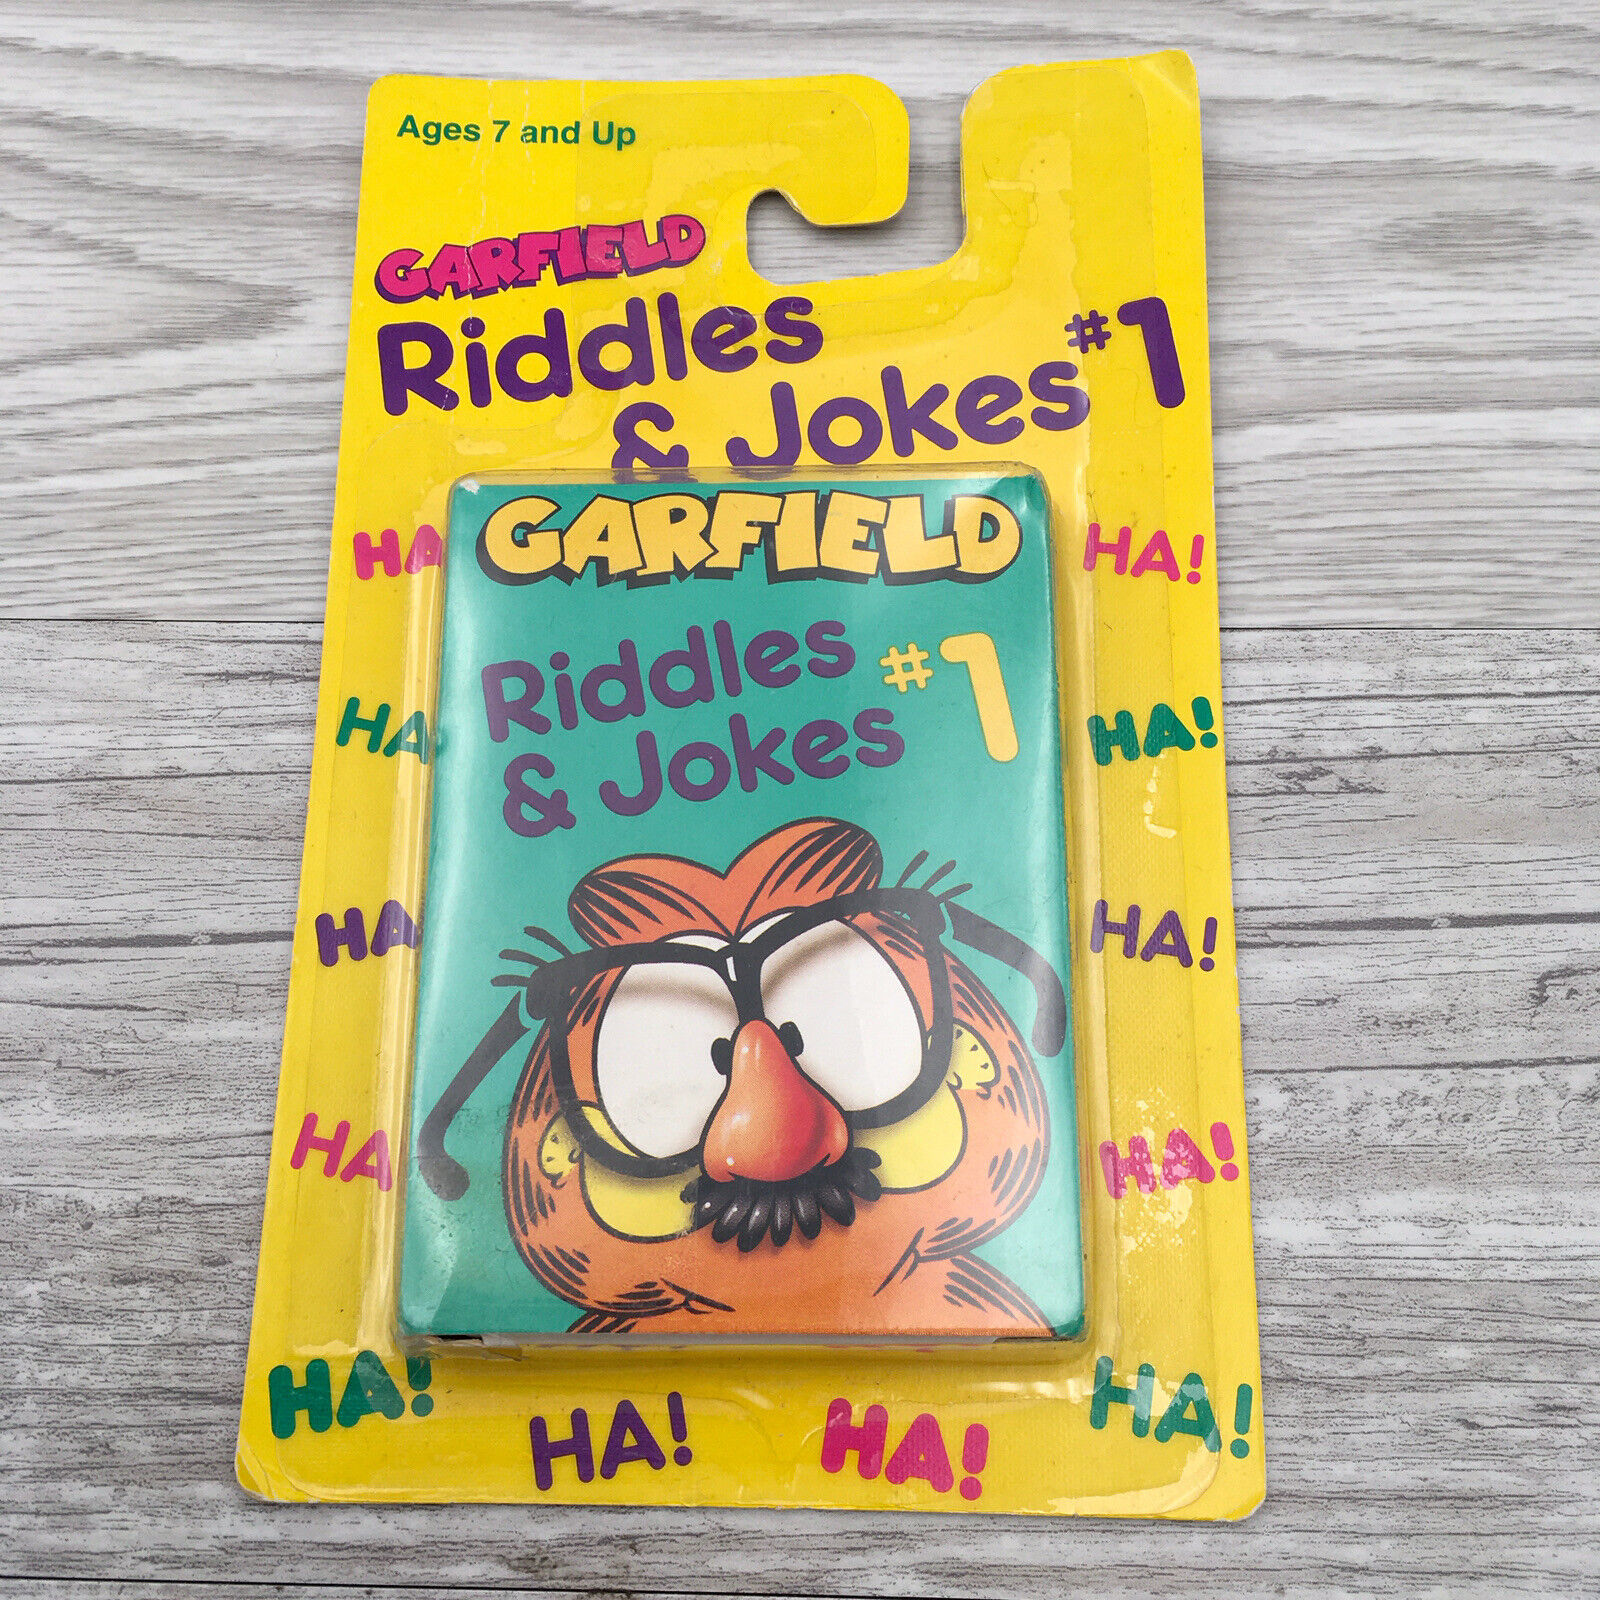 Vintage Bicycle Games Garfield the Cat Riddles & Jokes #1 Deck